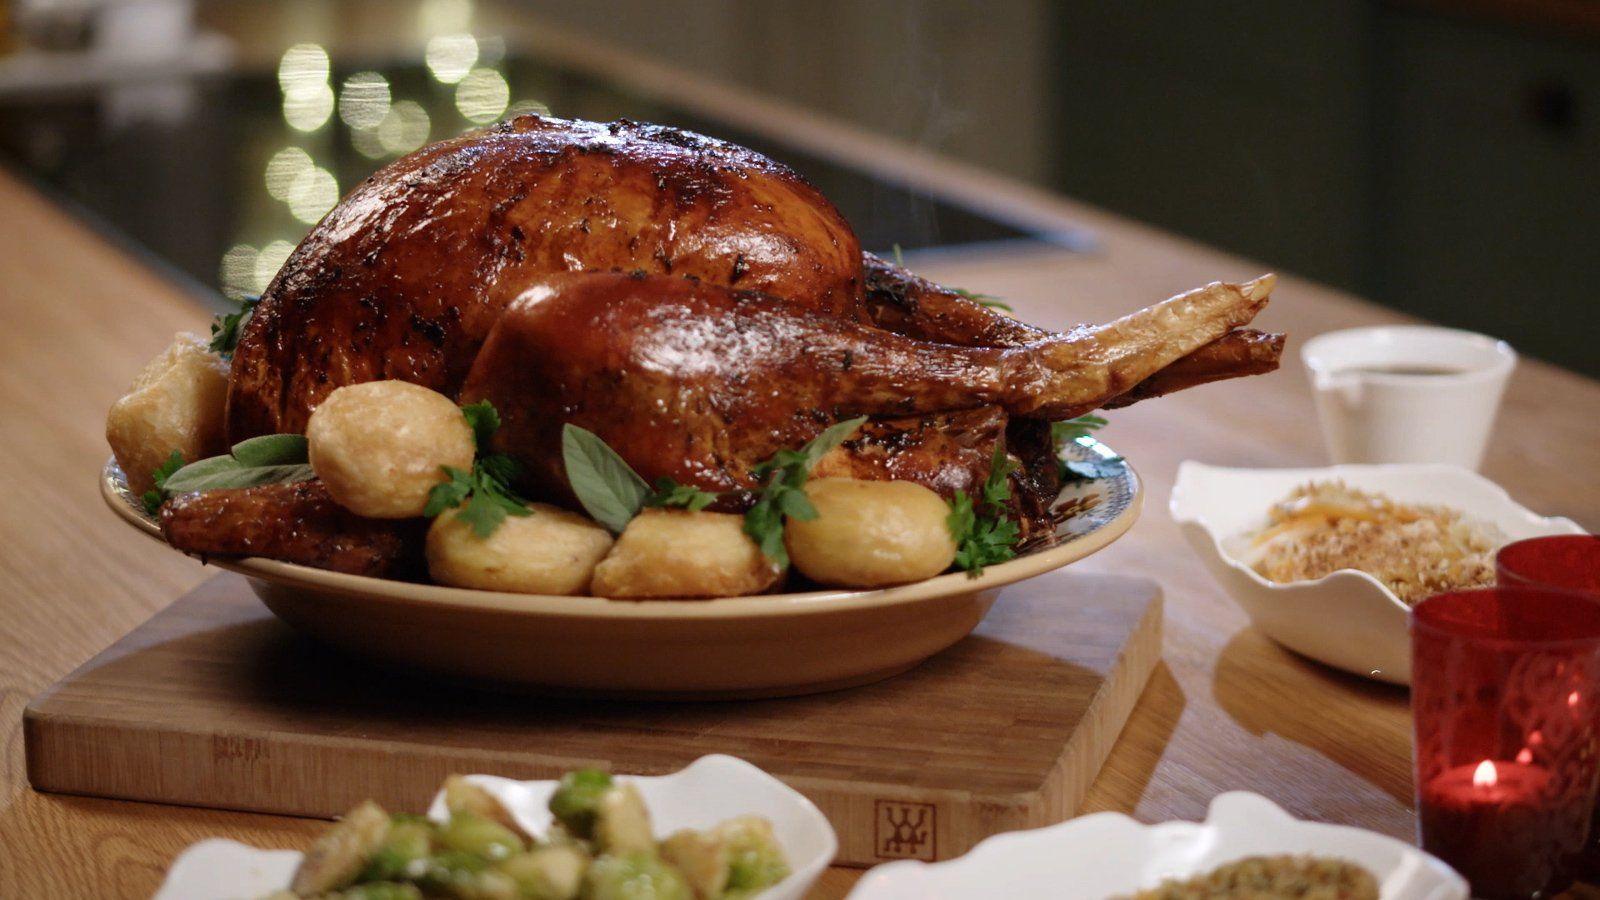 Days Of Christmas Day 3: Neven Maguire's Turkey